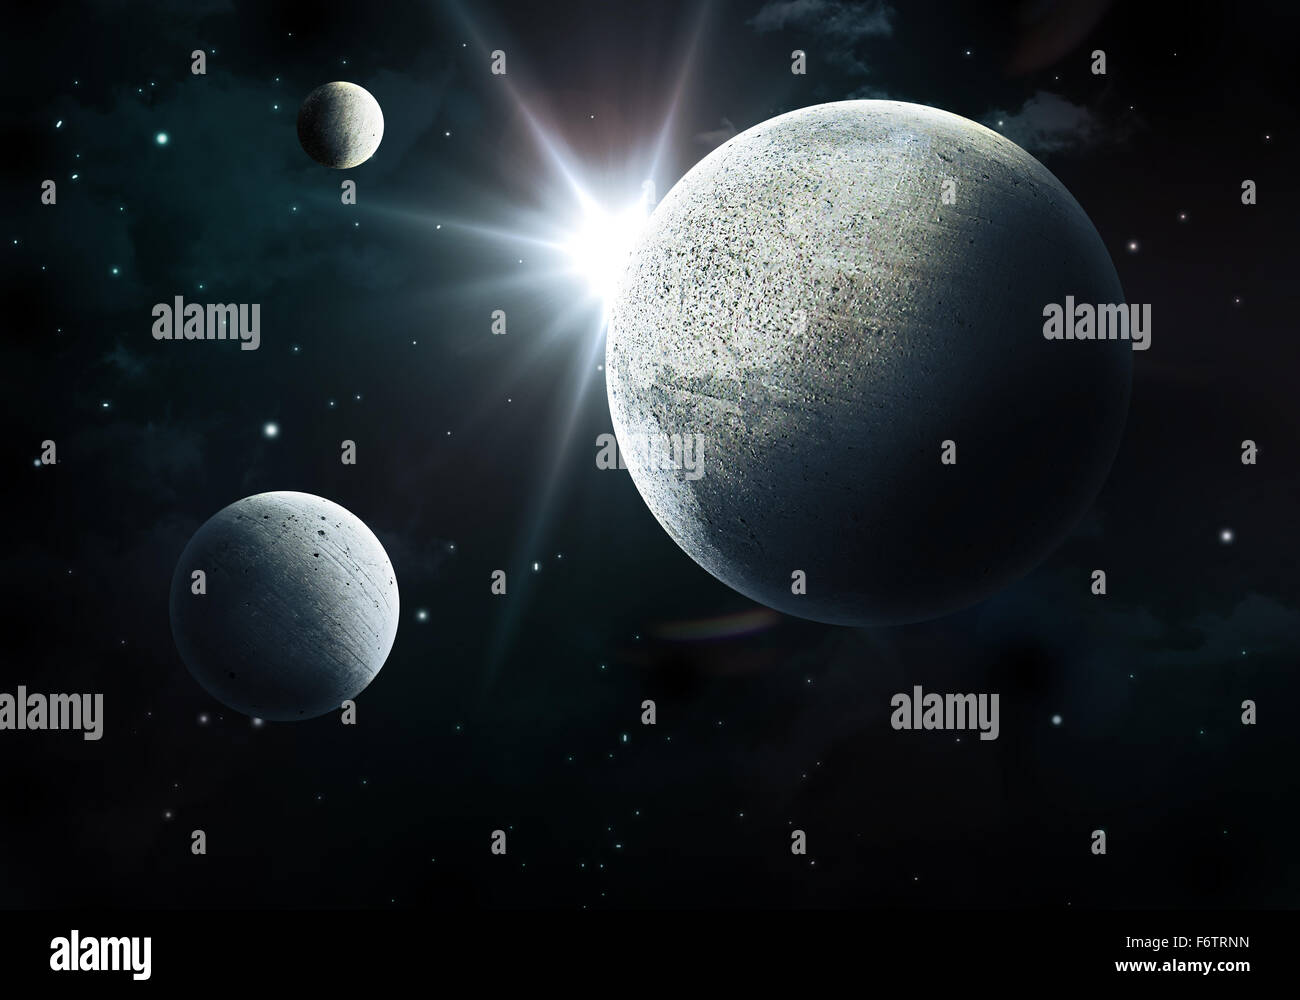 Space scene with fictional planets and nebula Stock Photo